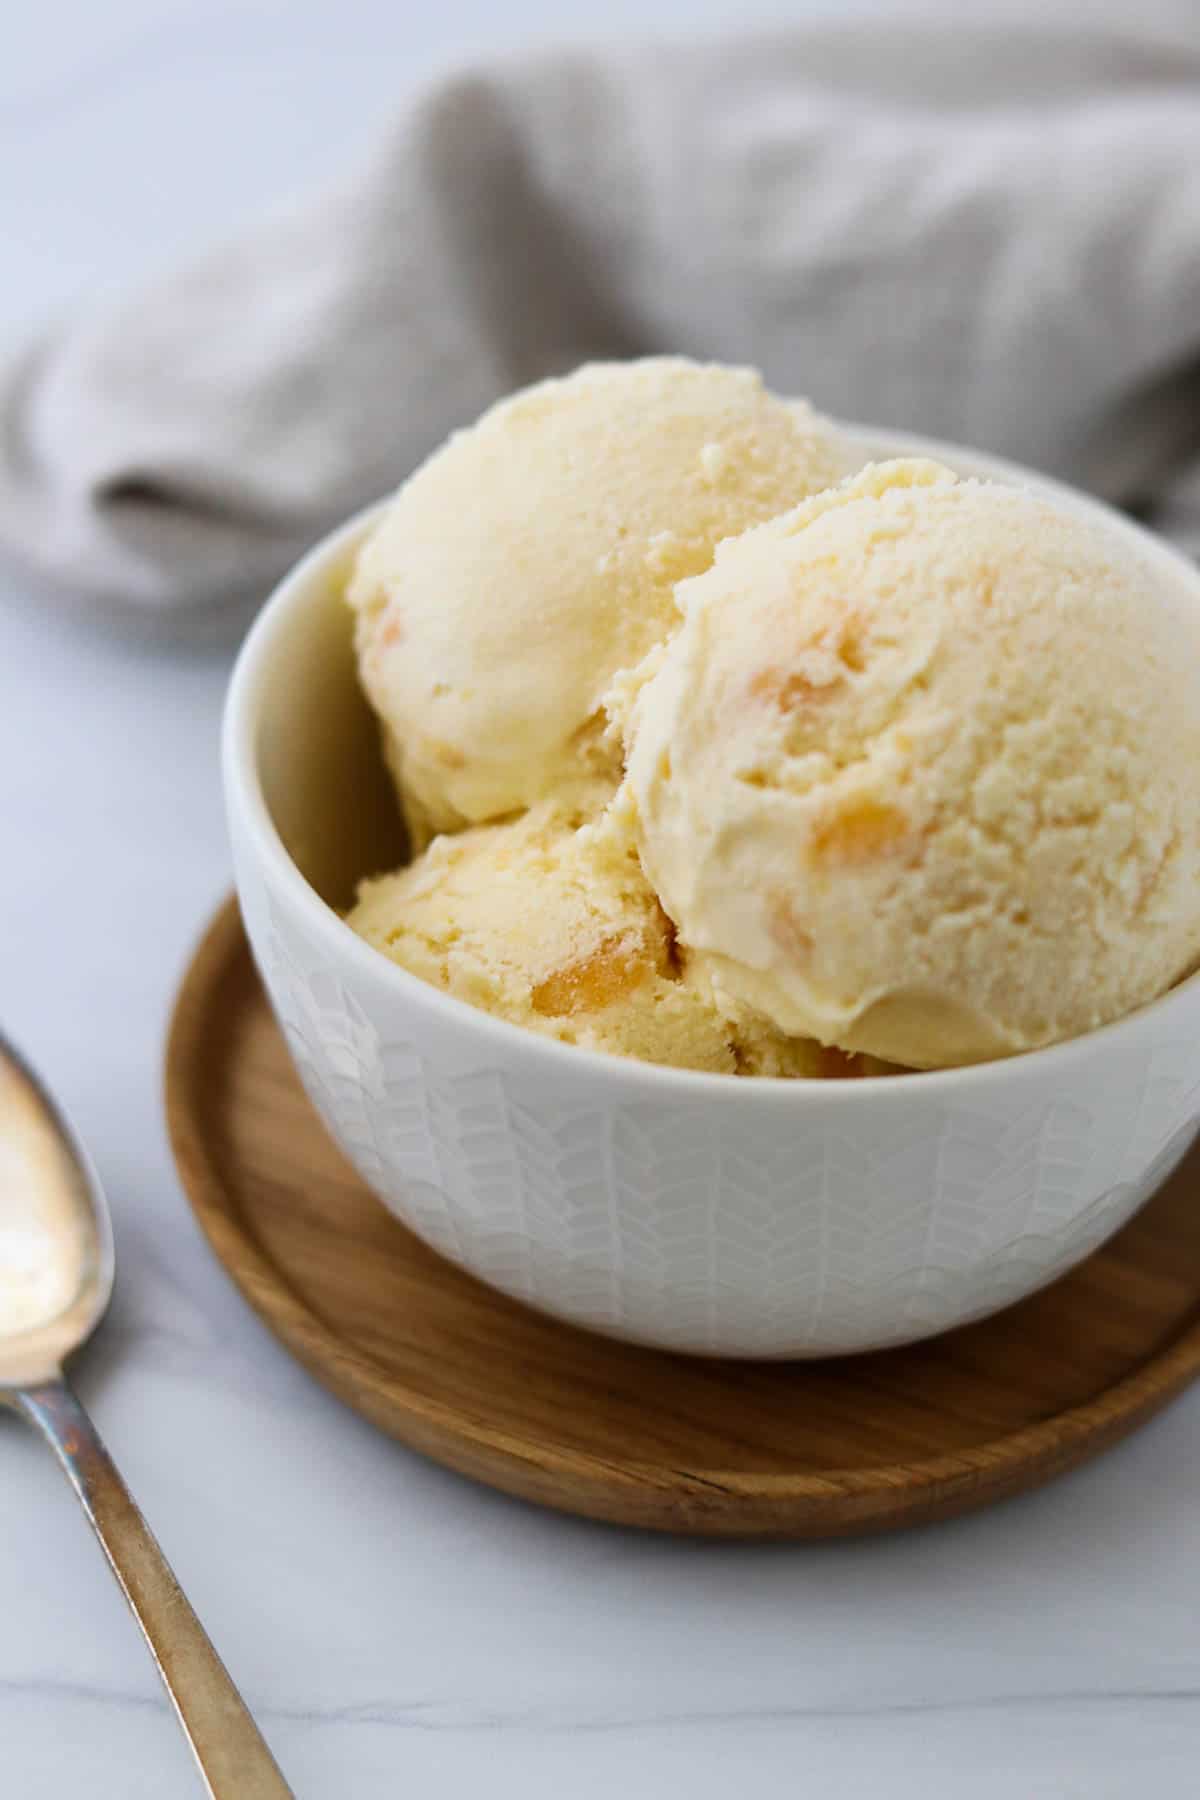 Peaches and Cream Ice Cream in a small bowl next to a spoon.